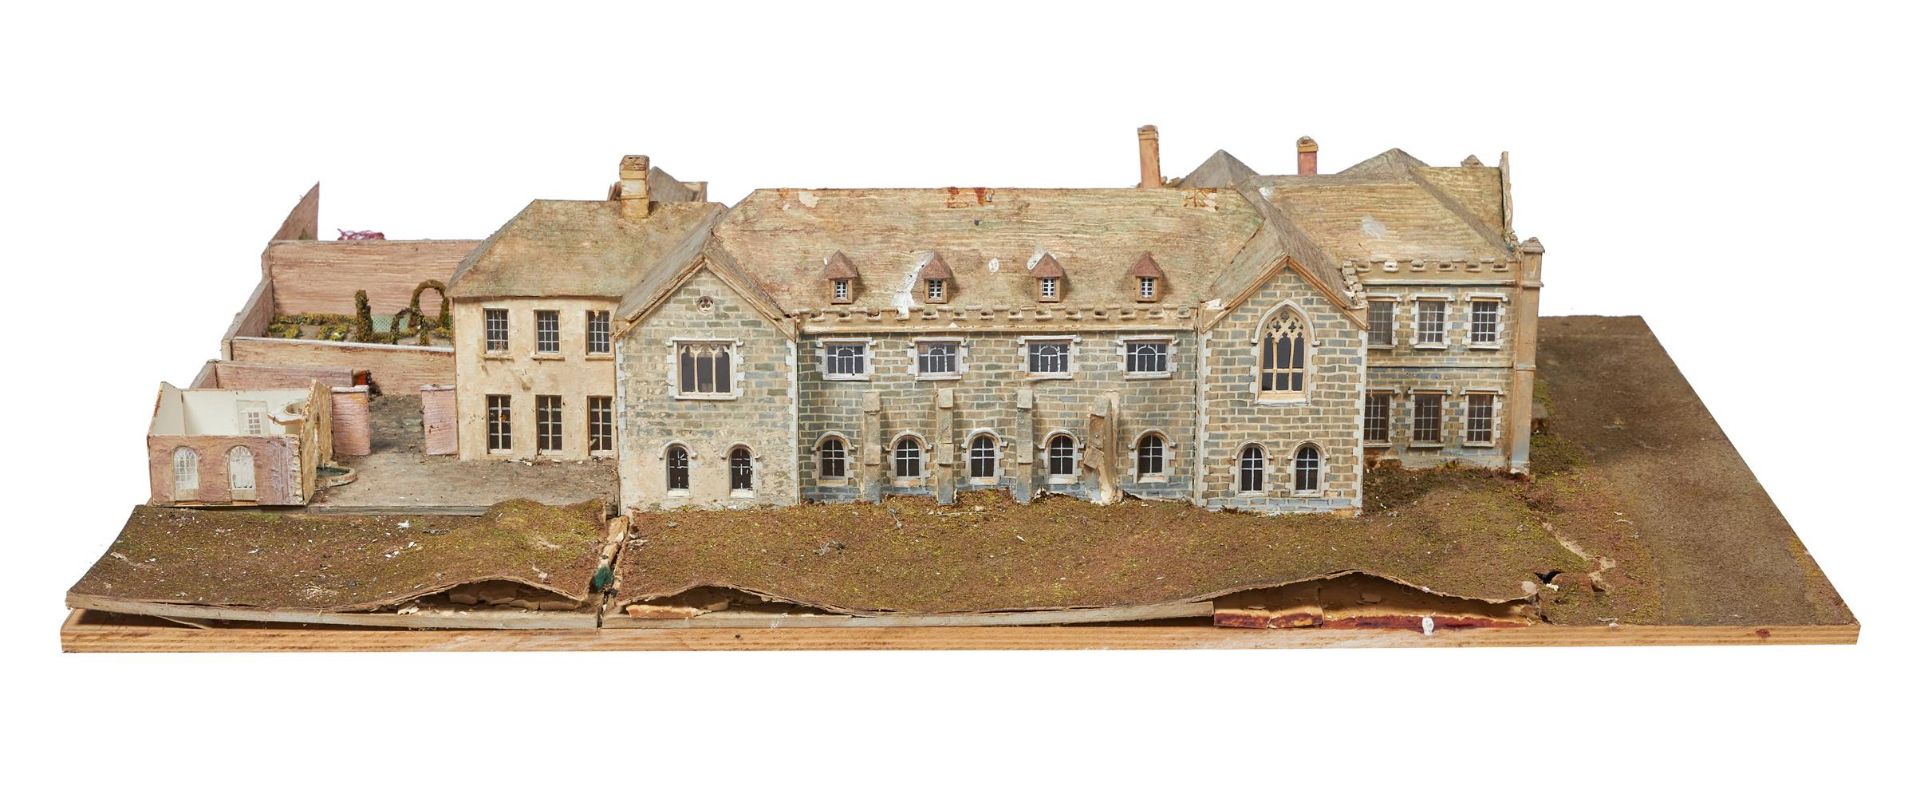 AN ARCHITECTURAL MODEL OF FLAXLEY ABBEY, BY OLIVER MESSEL - Image 7 of 34